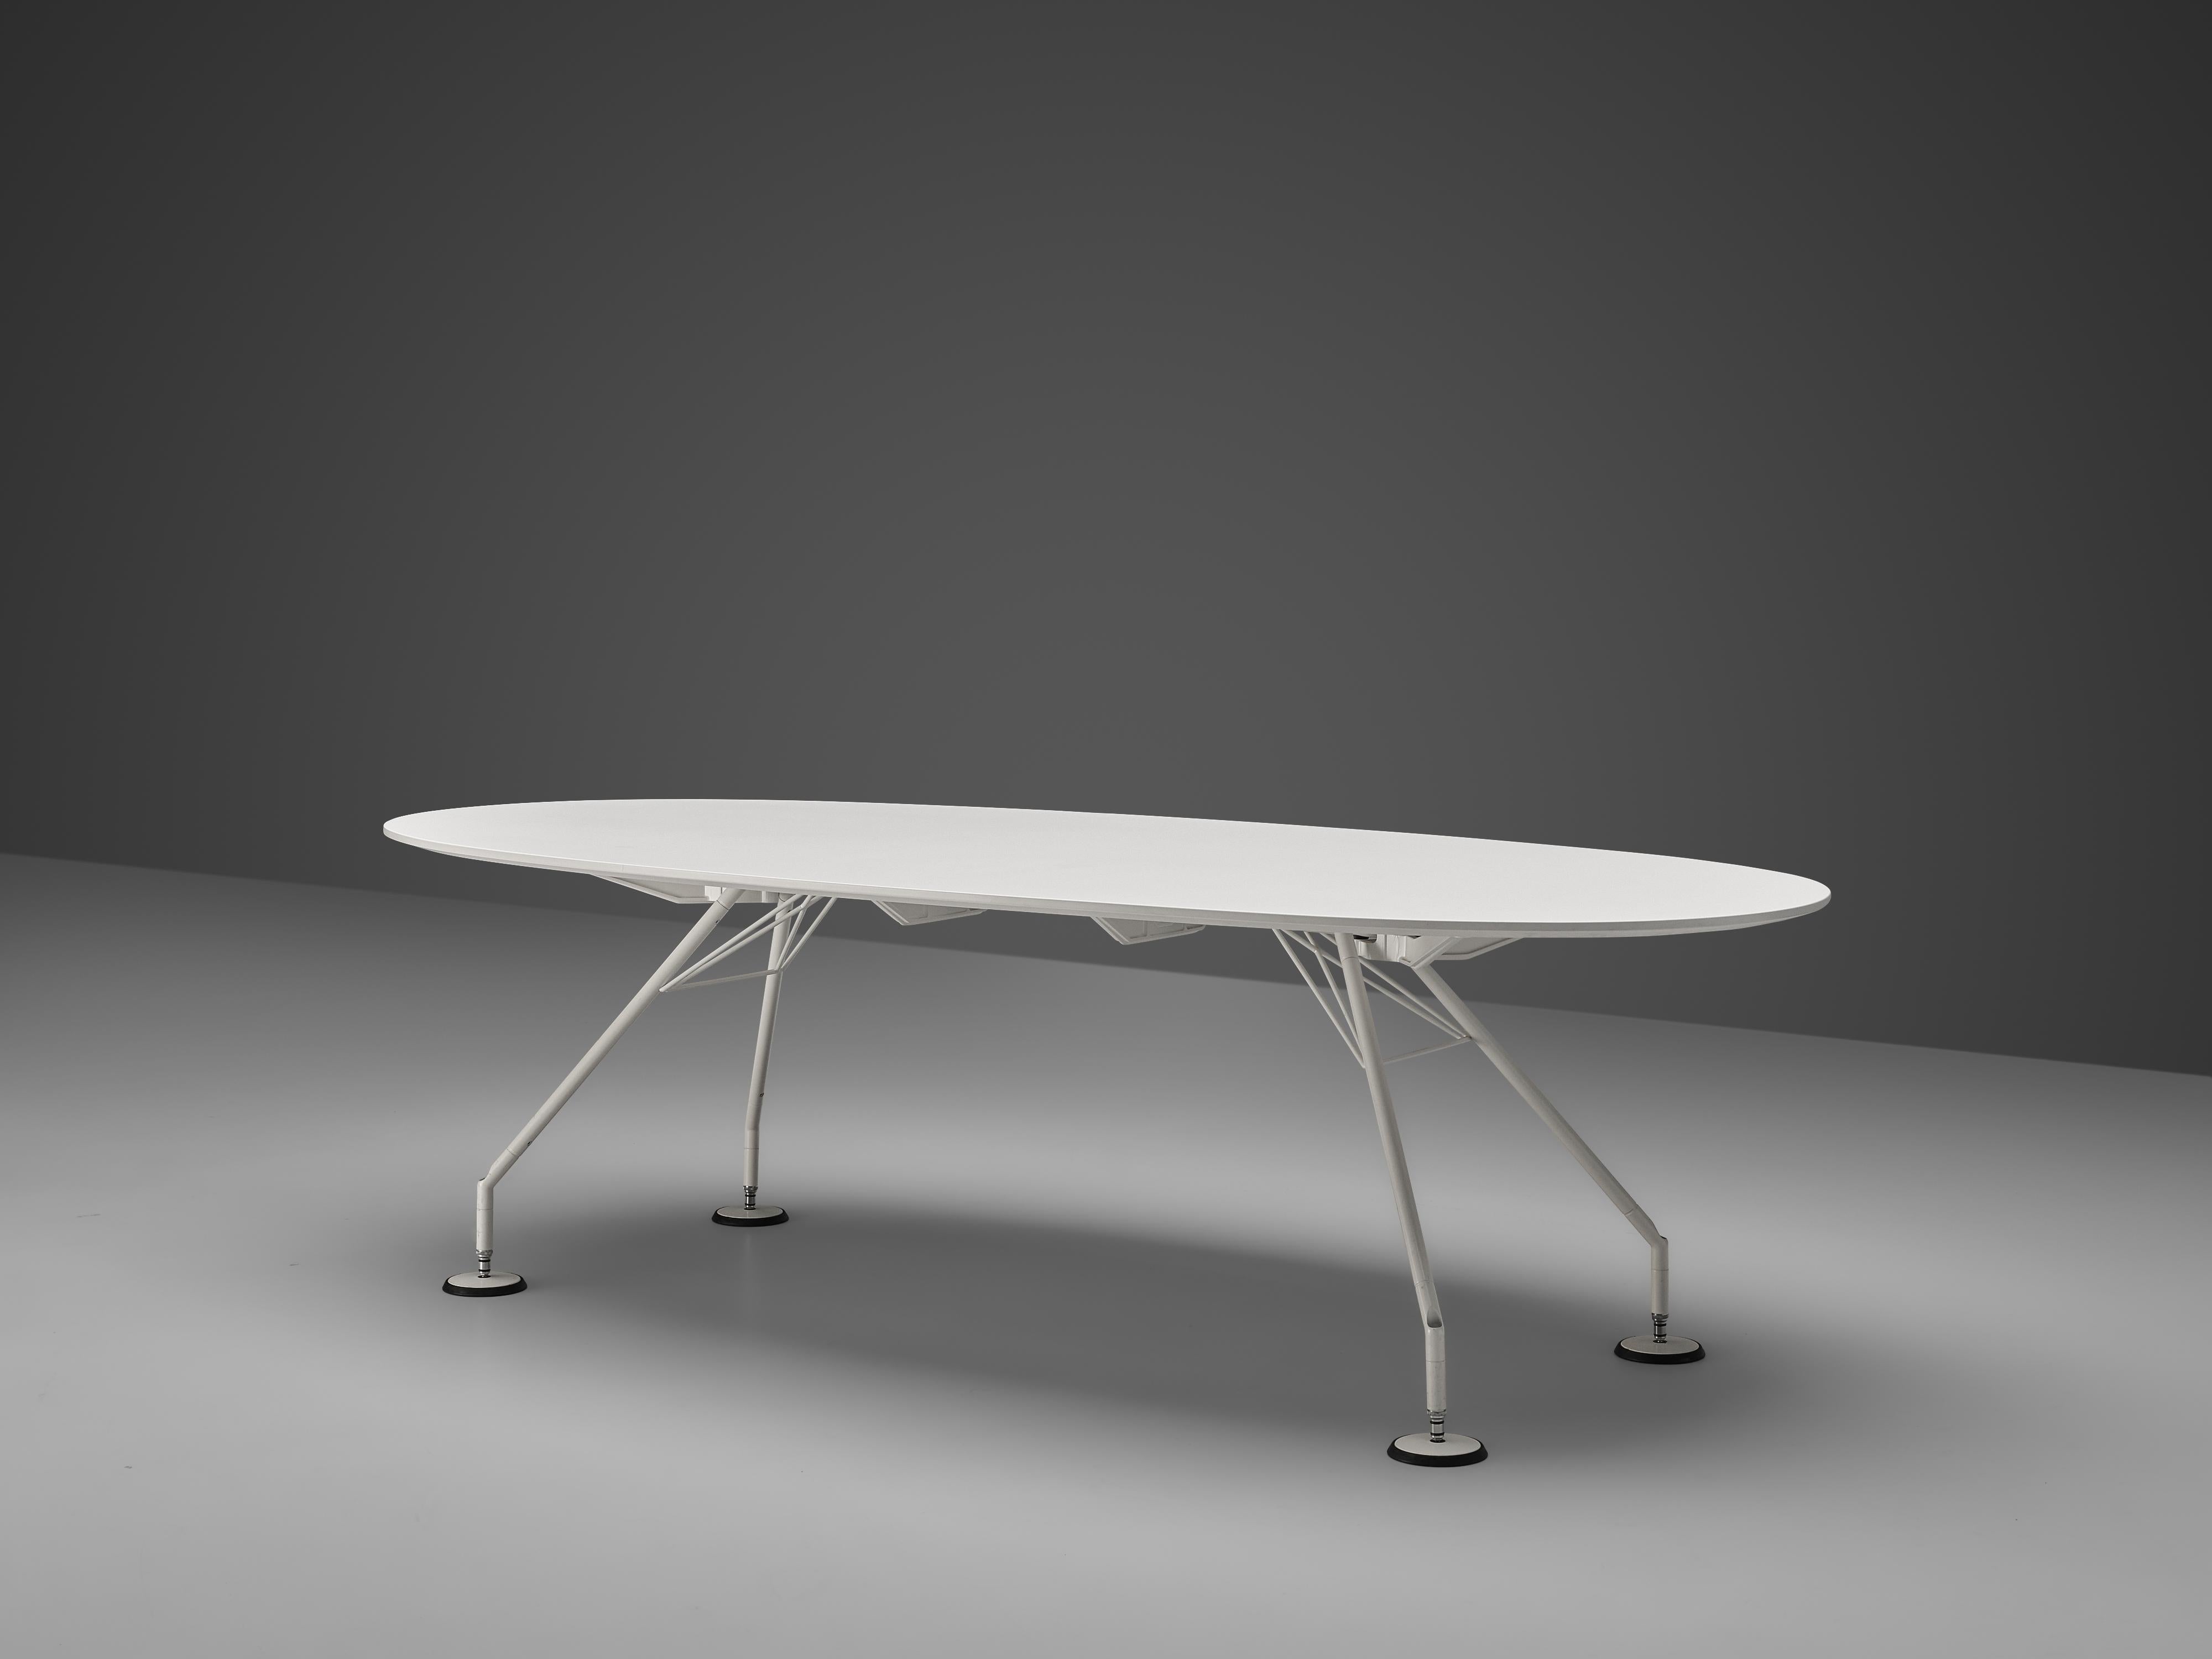 Norman Foster for Tecno, ‘Nomos’ dining or conference table, wood, metal, Italy, design 1986.

The ‘Nomos’ table designed by Norman Forster, manufactured by Tecno, is characterized by the stunning design of the base. Like Norman Foster said it in